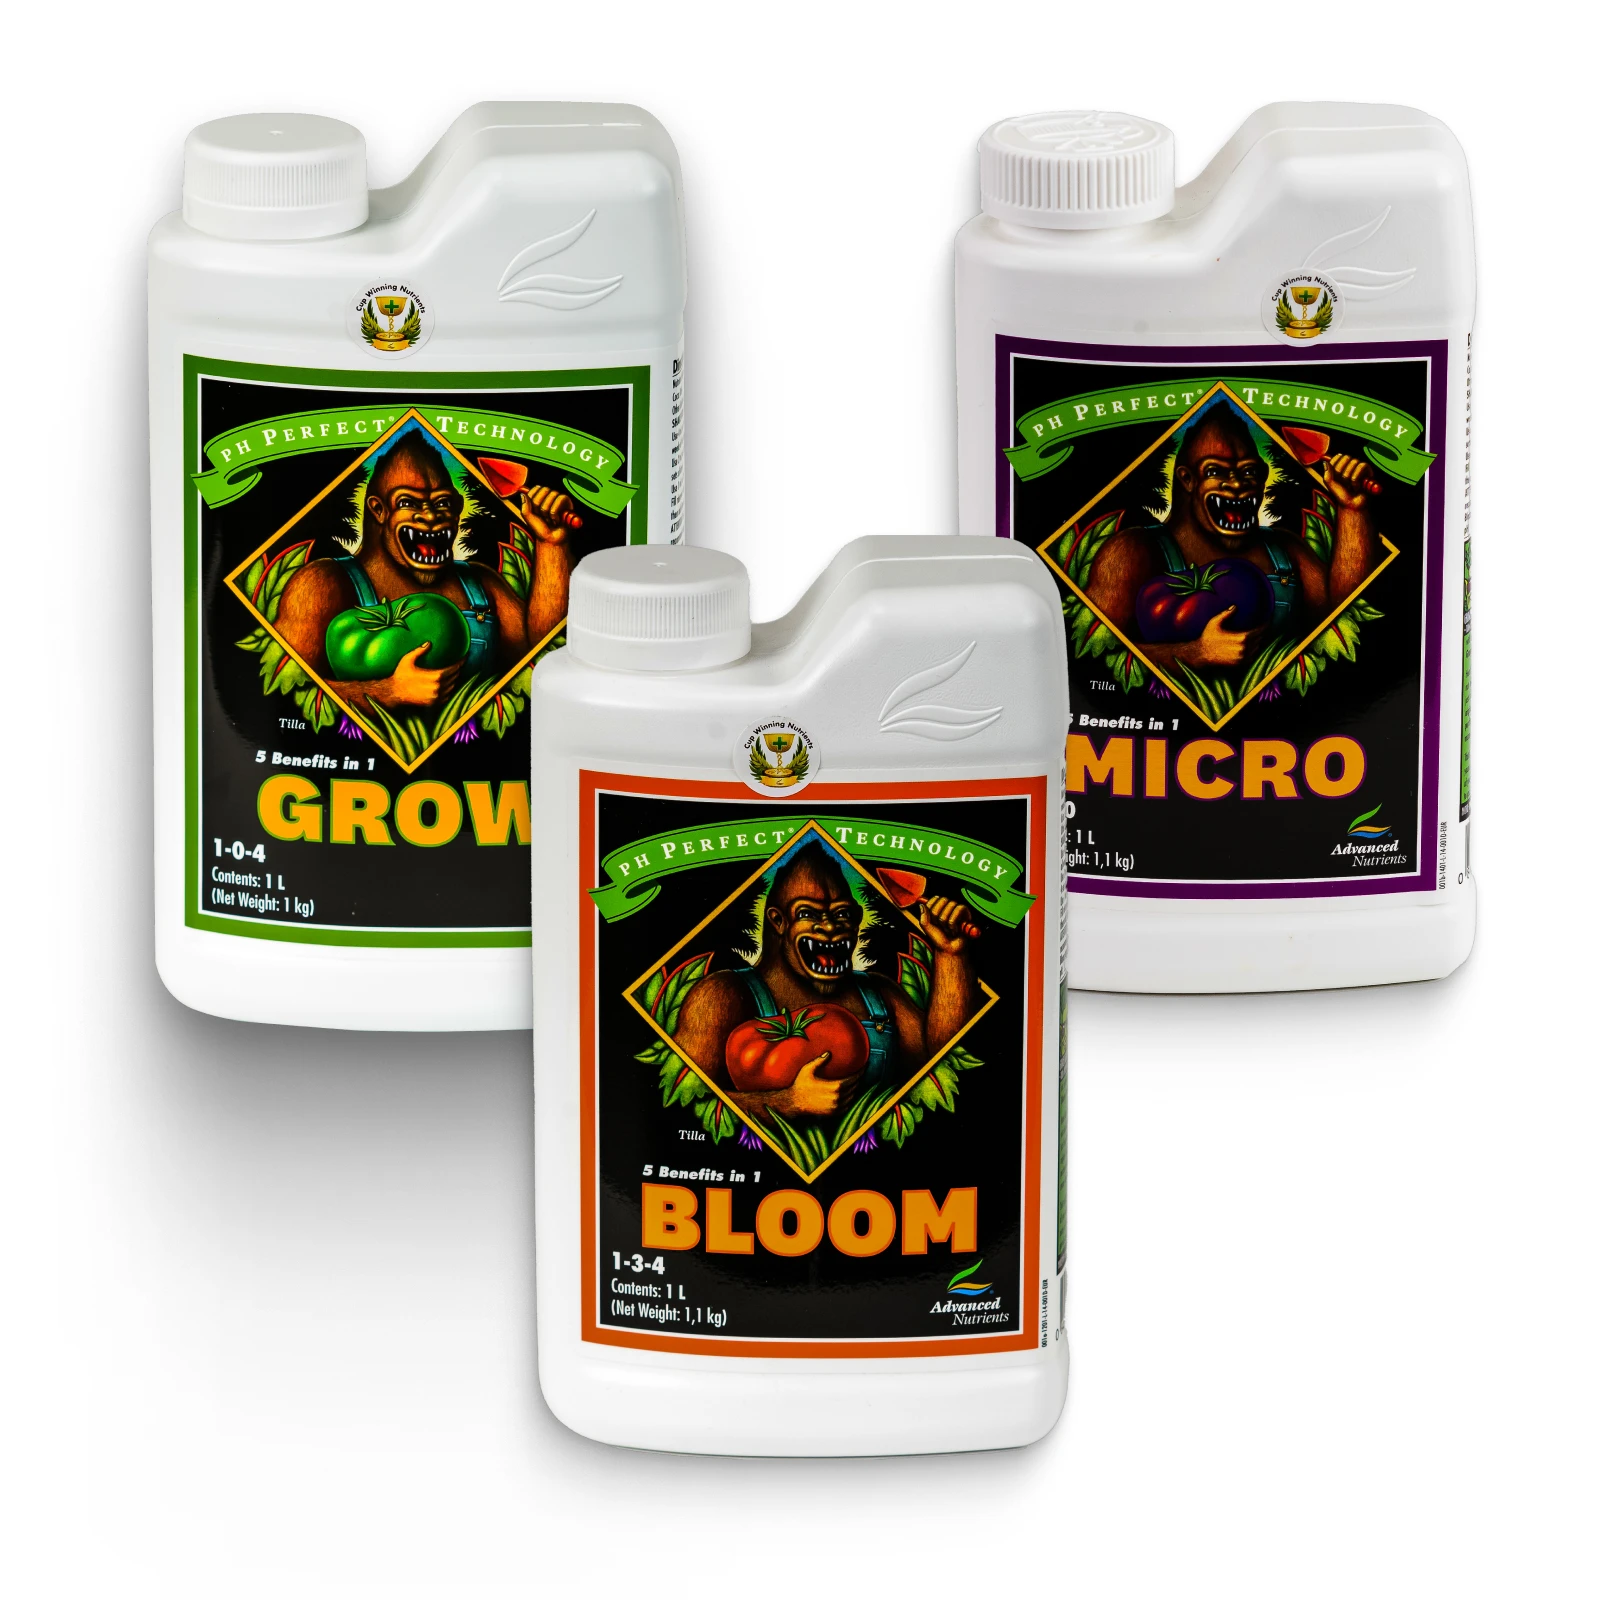 Advanced Ph perfect grow micro bloom fertilizer kit can be used starting from seeding stage and until the end of flowering phase